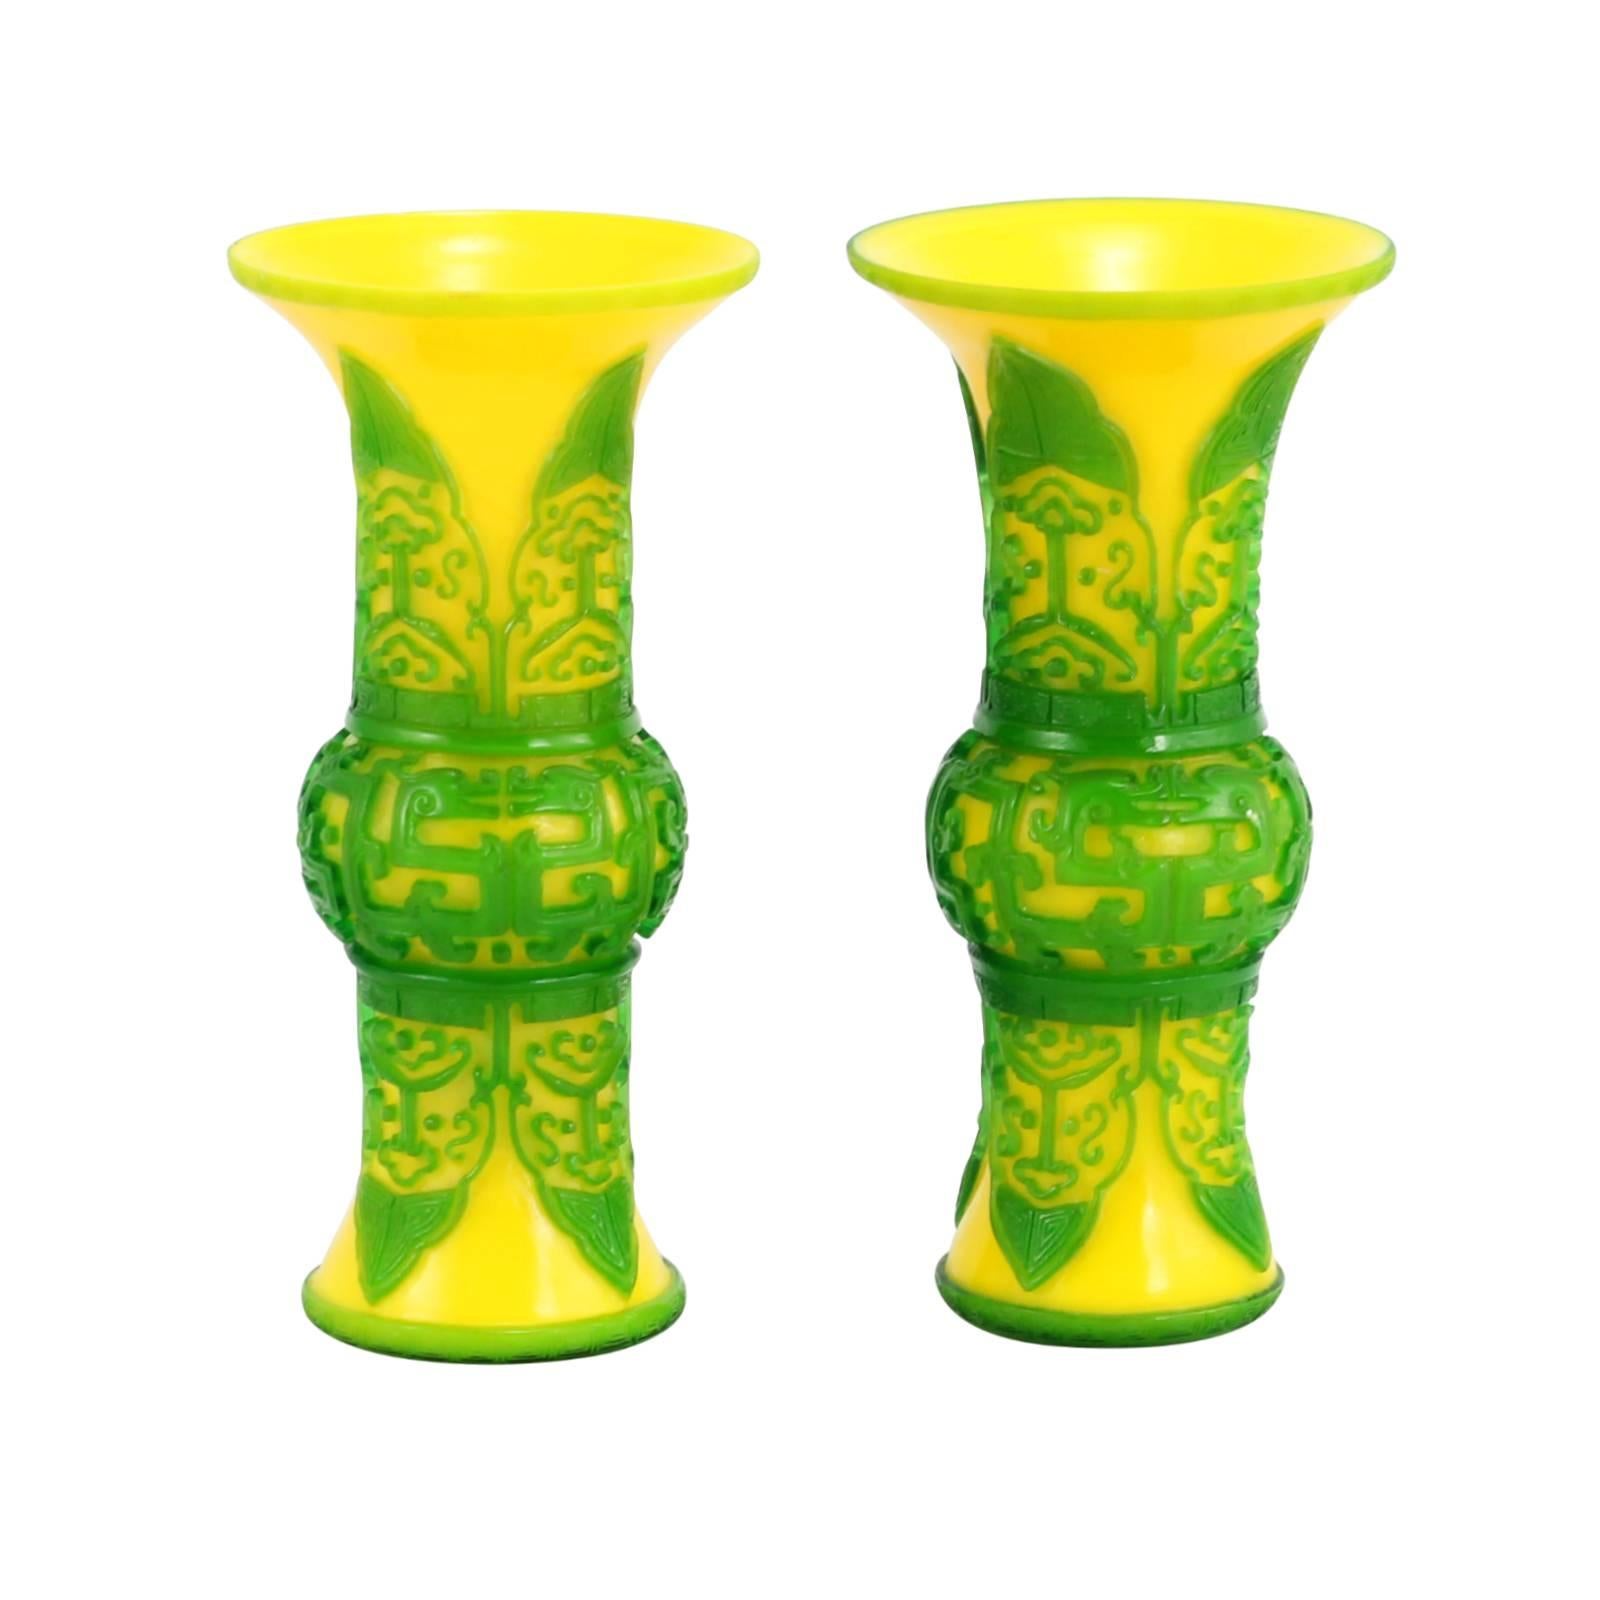 Early 20th century Chinese Peking glass 'gu' form vases. Yellow with green overlay.

Originating in Peking, China in the 18th century, this form of glasswork is achieved by layering different colored glasses around a core shape. The texture is